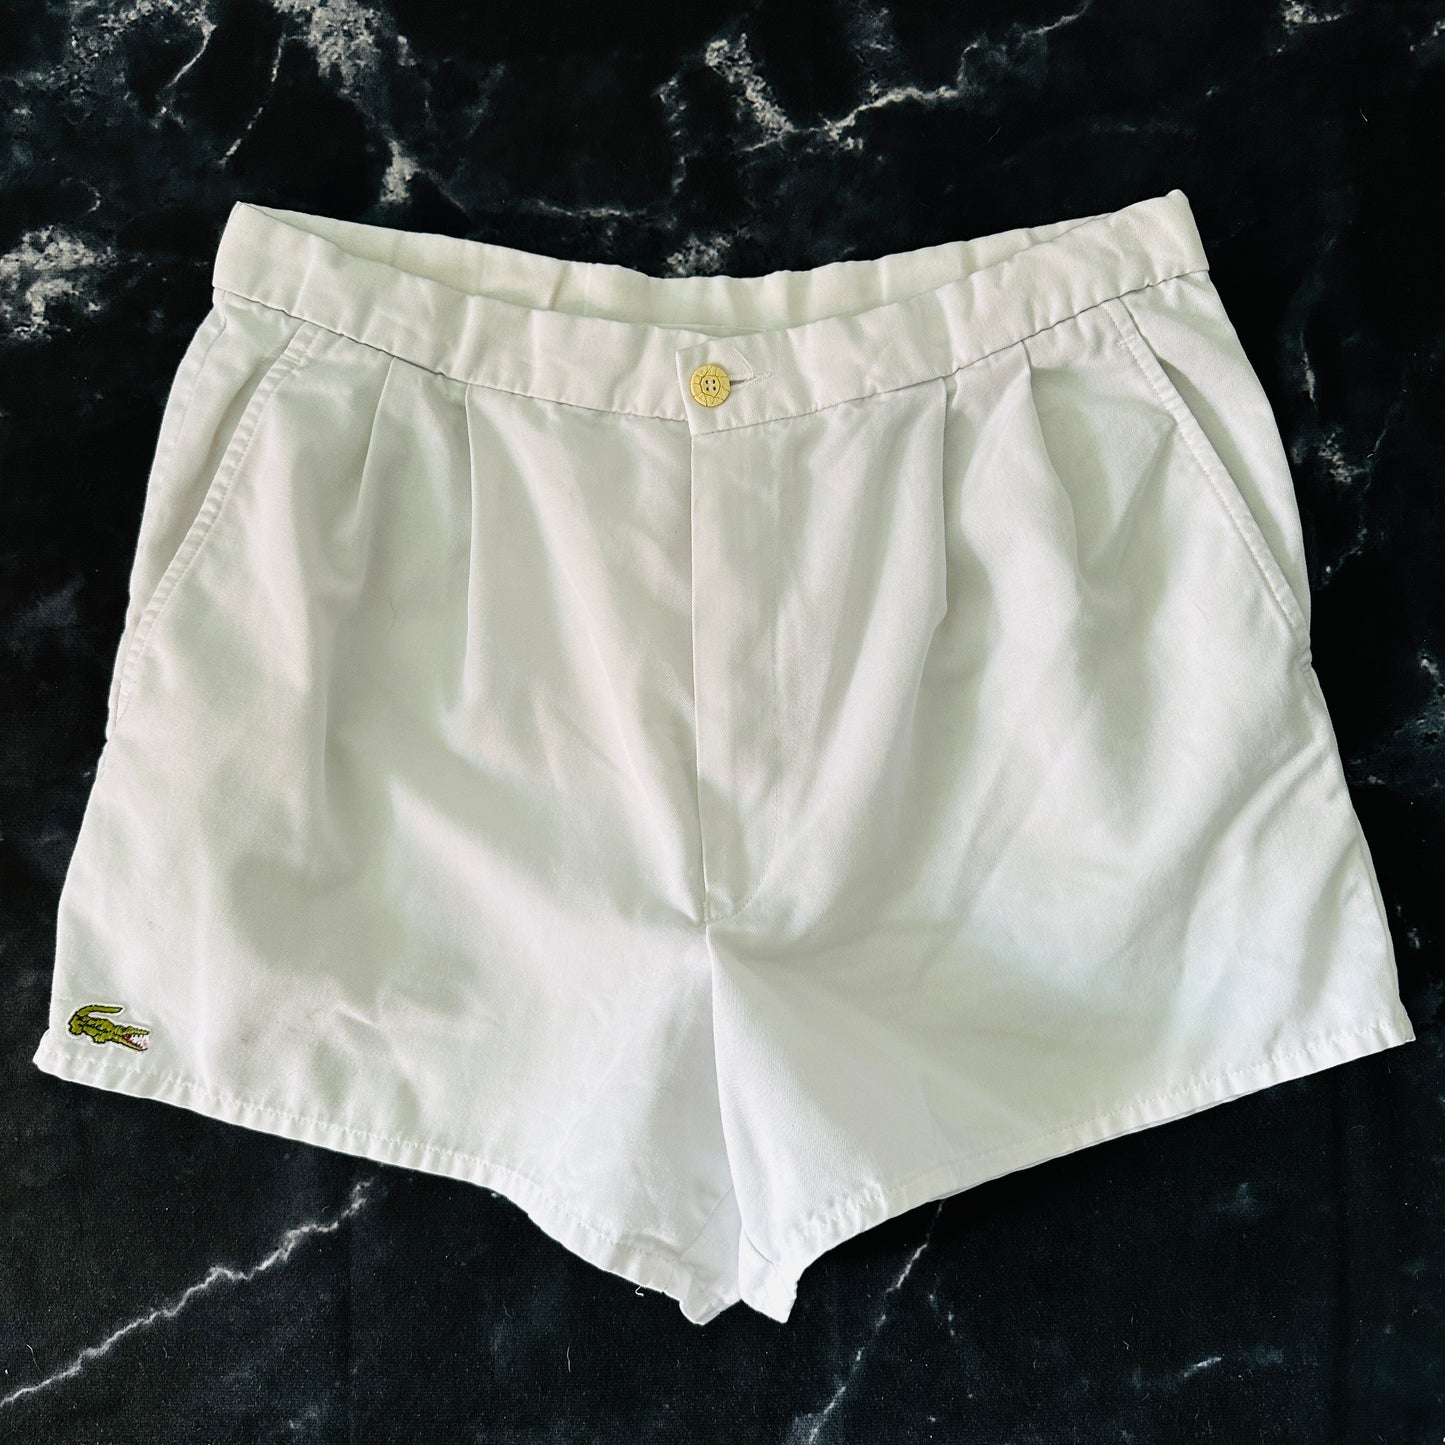 Lacoste Vintage 80s Tennis Shorts - White - 48 / S - Made in France